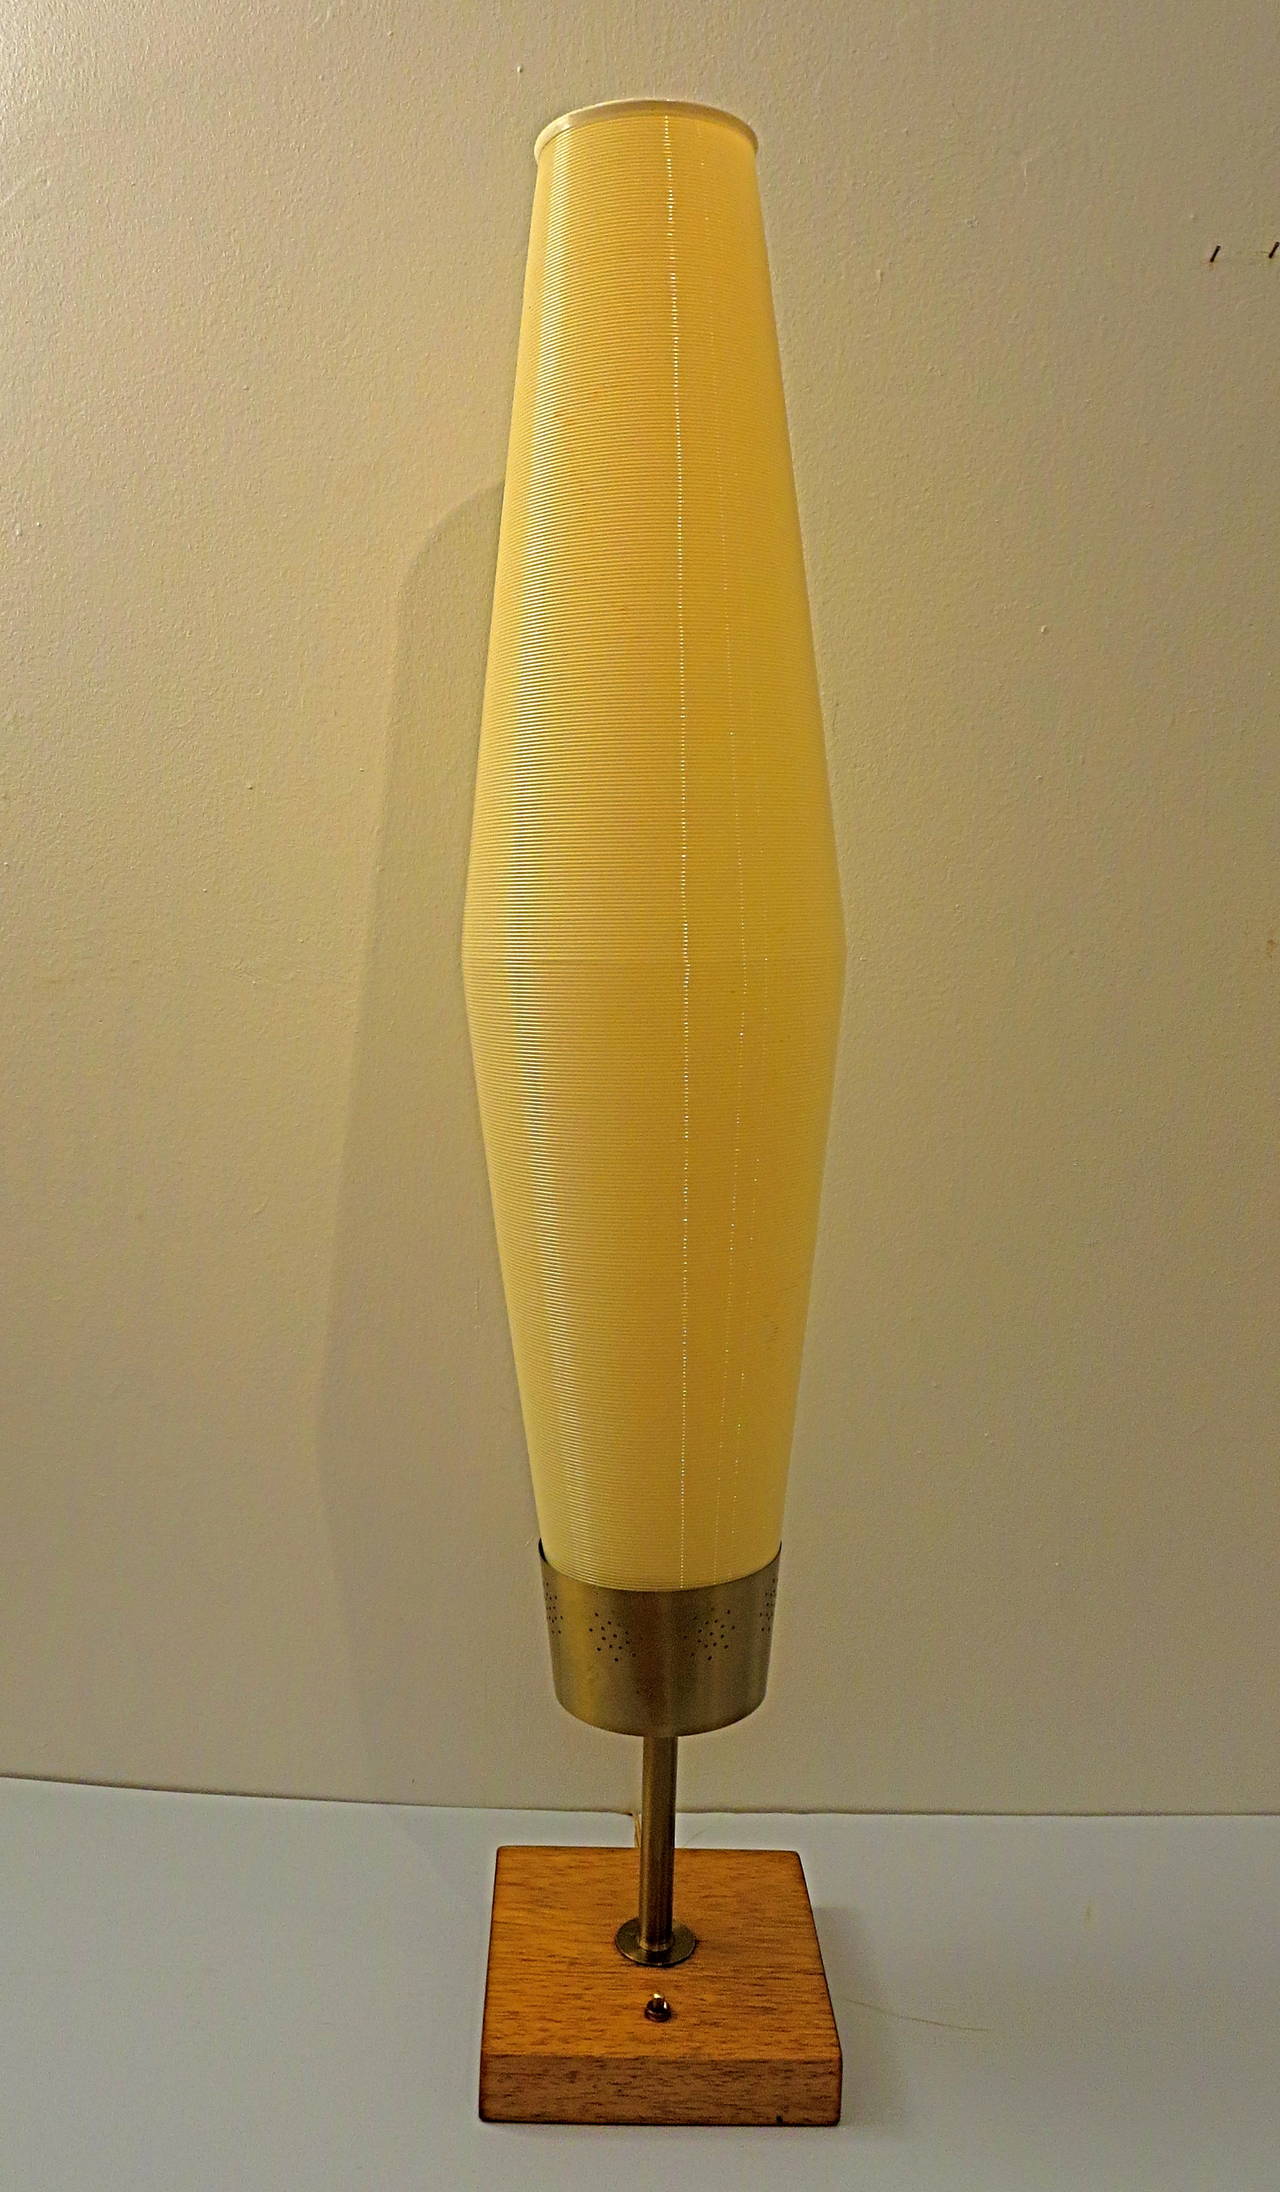 Striking tall and rare lamp designed by Heifetz with a plastic corrugated shade by Rotoflex, circa 1960s great condition push off/on switch, the wood base its refinished and perforated brass stand.